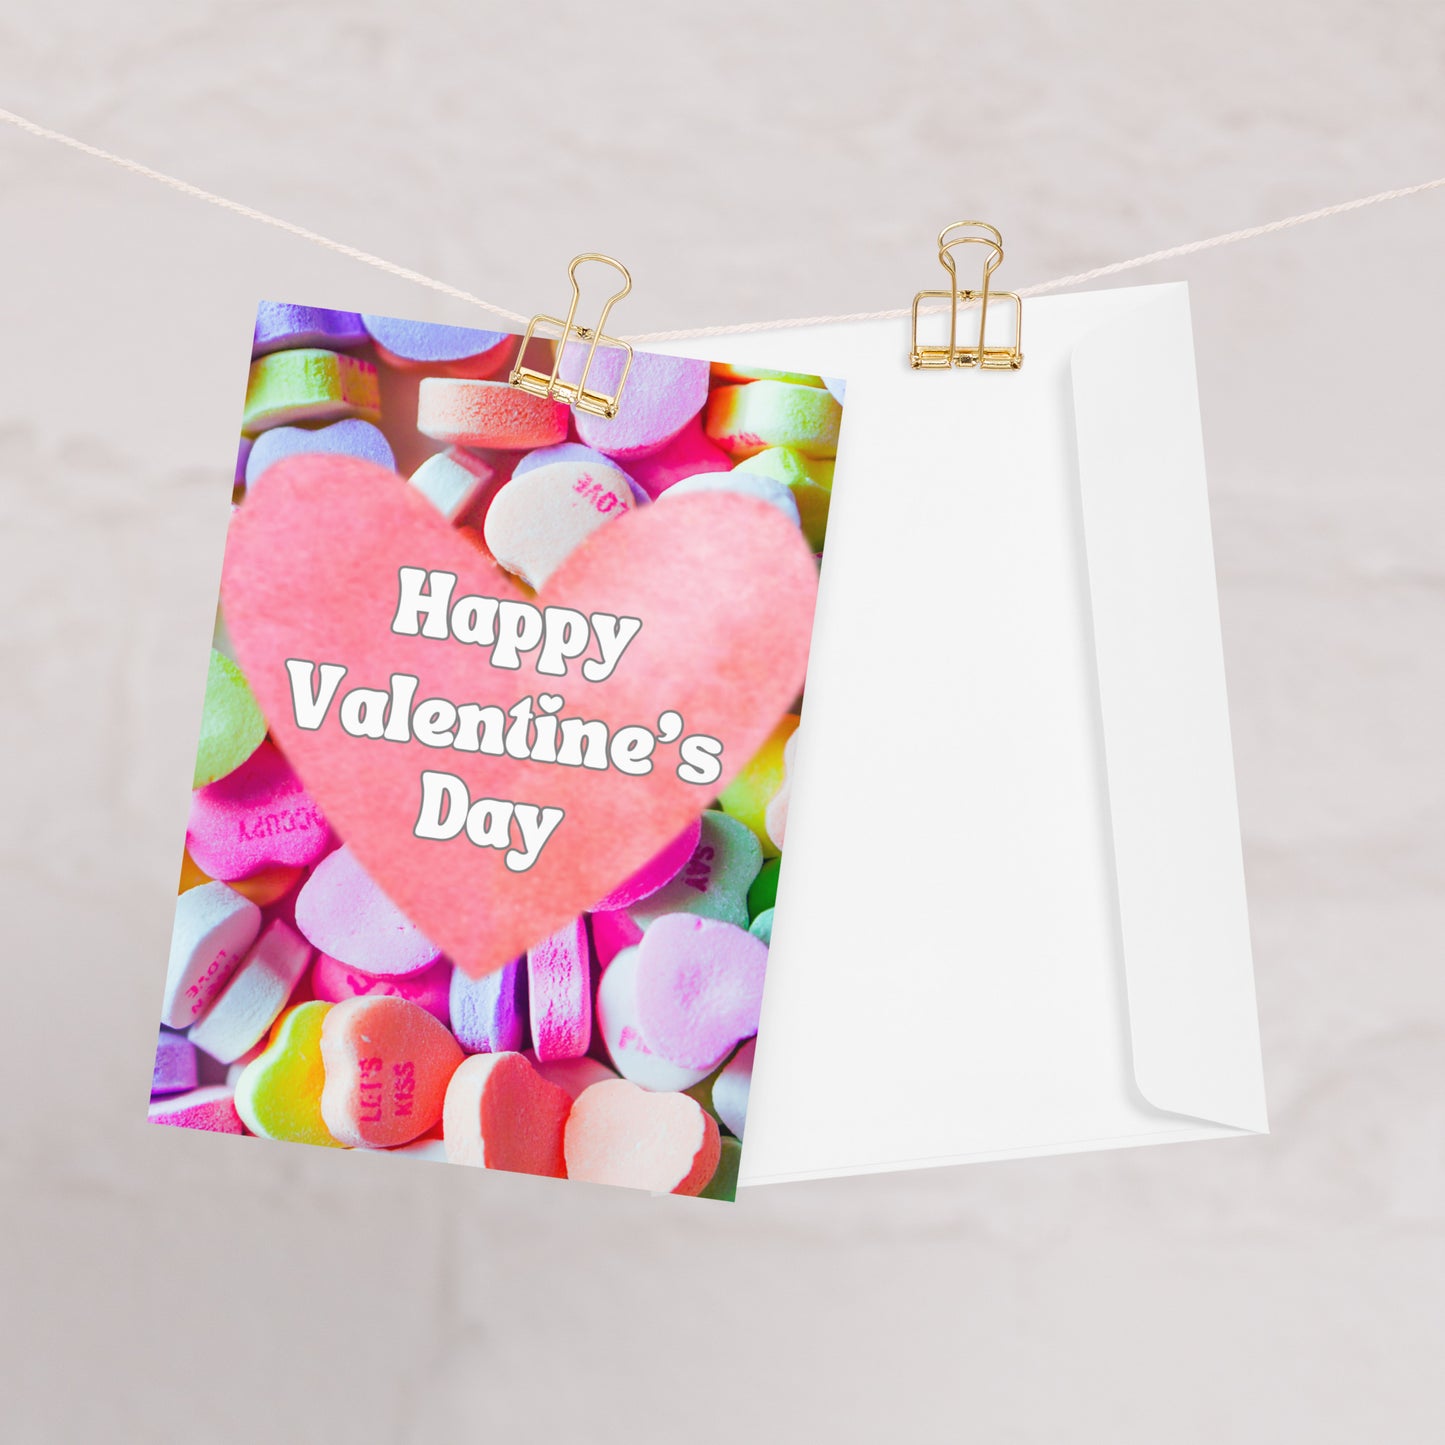 Valentine's Day candy hearts card